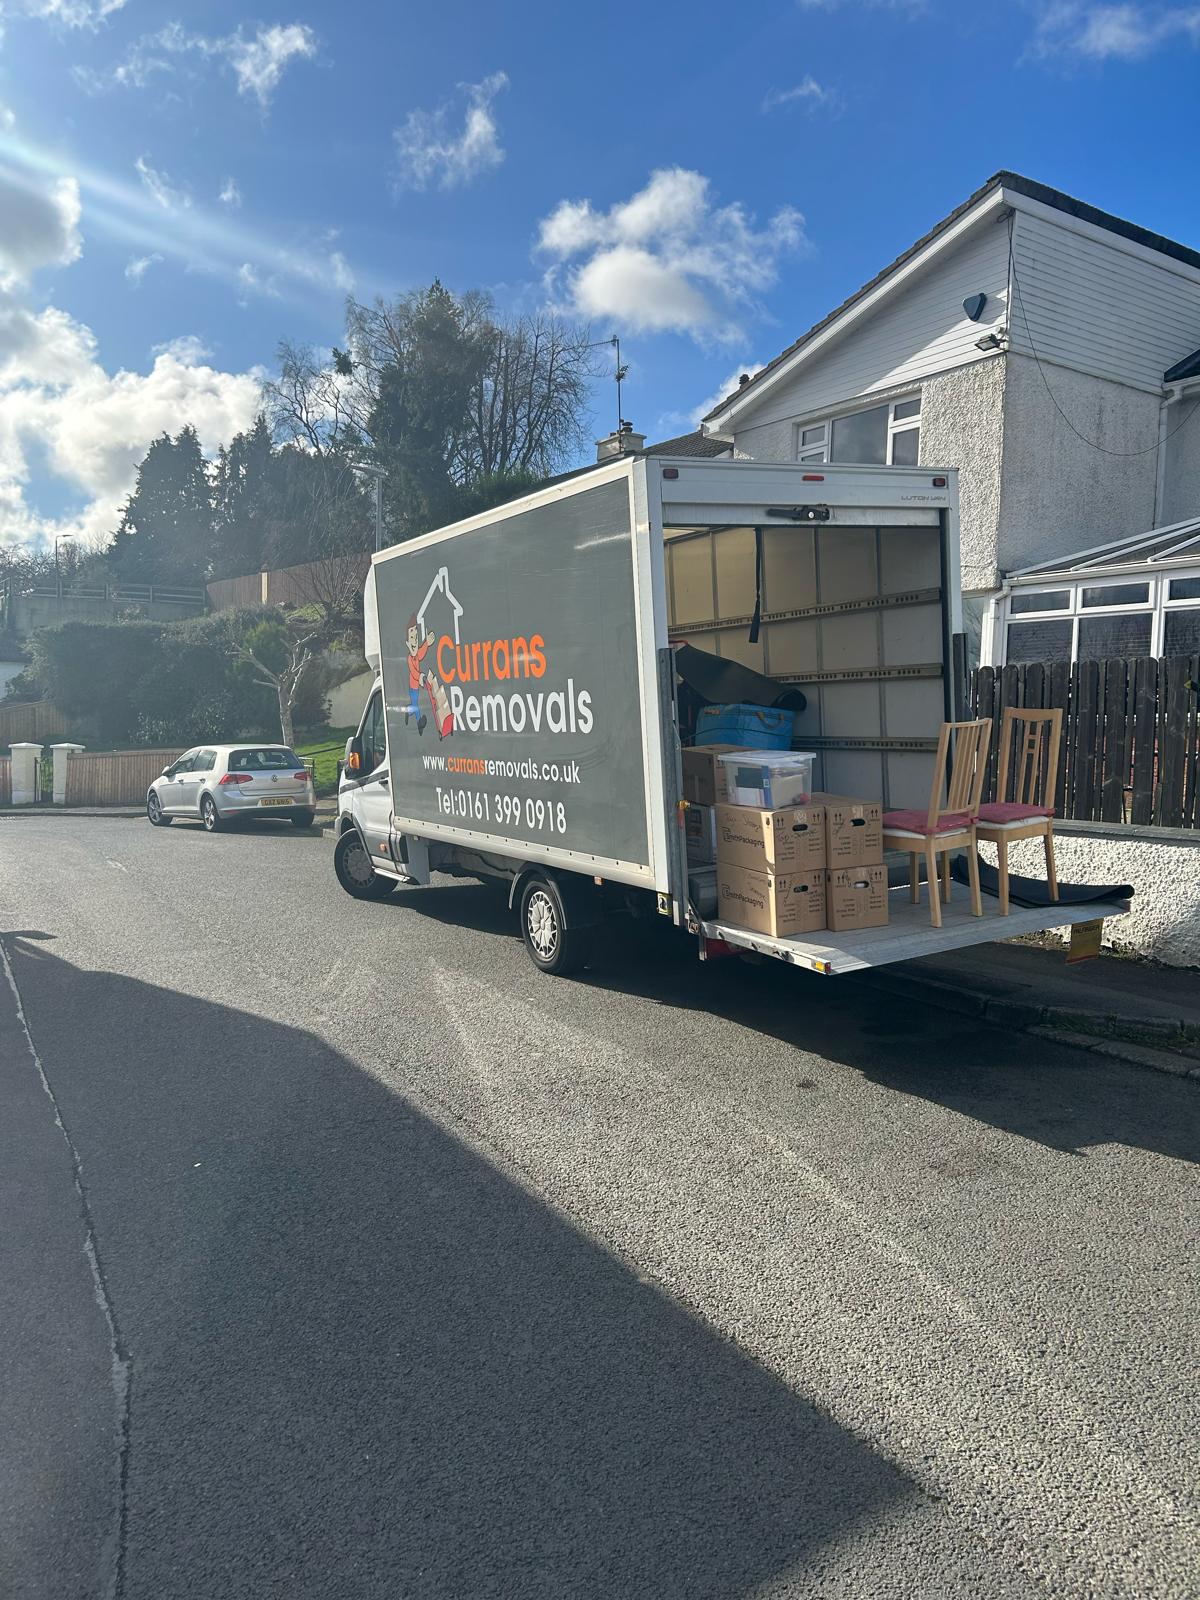 Welcome to Curran's Removals - Your Trusted House Removal Service in Manchester. We specialise in providing top-notch house removal services, ensuring a seamless and stress-free experience for your move. Our team is dedicated to catering to all your moving needs.